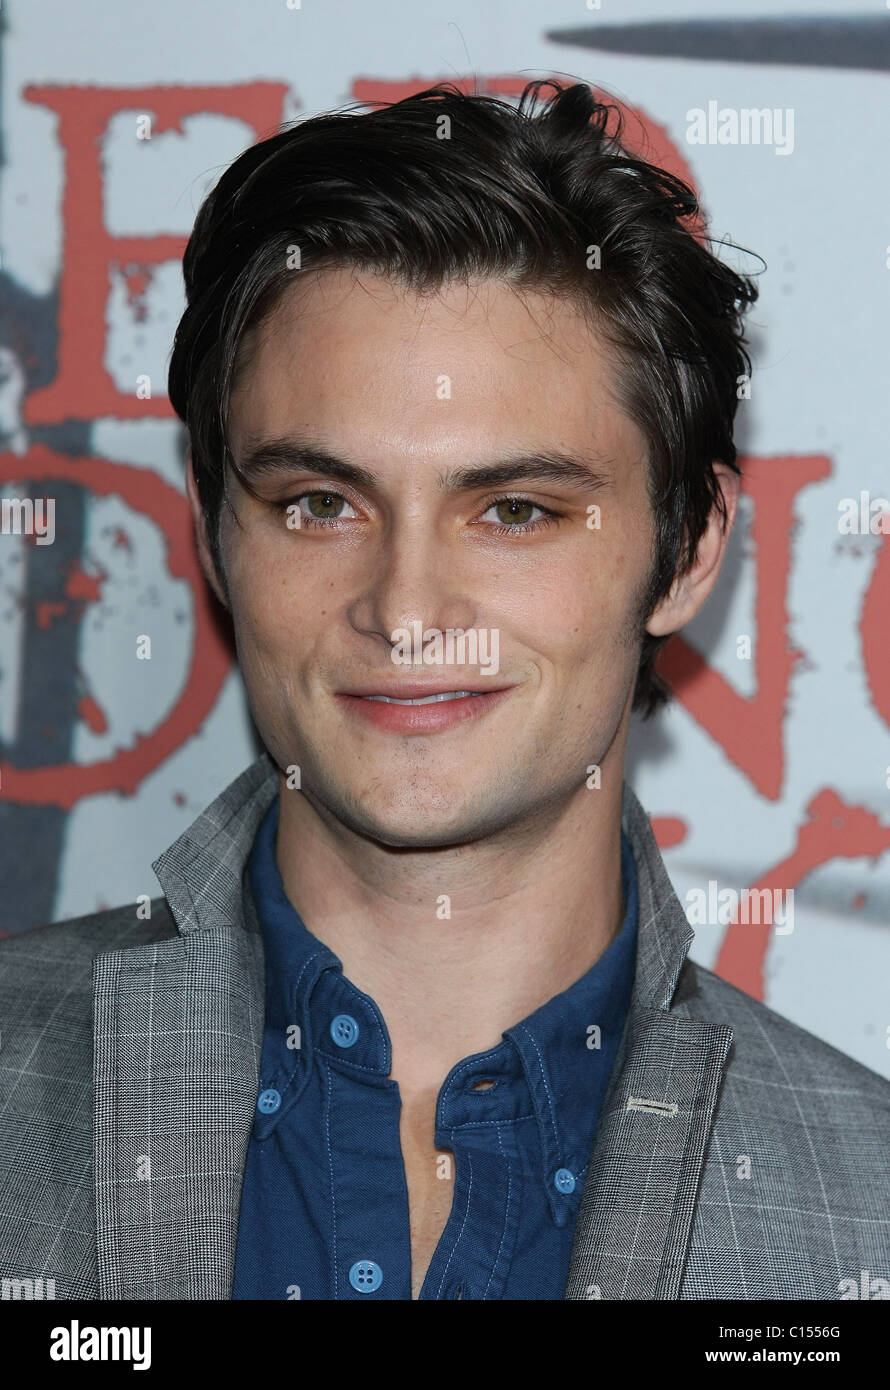 SHILOH FERNANDEZ RED RIDING HOOD LOS ANGELES PREMIERE. WARNER BROS.  HOLLYWOOD LOS ANGELES CALIFORNIA USA 07 March 2011 Stock Photo - Alamy